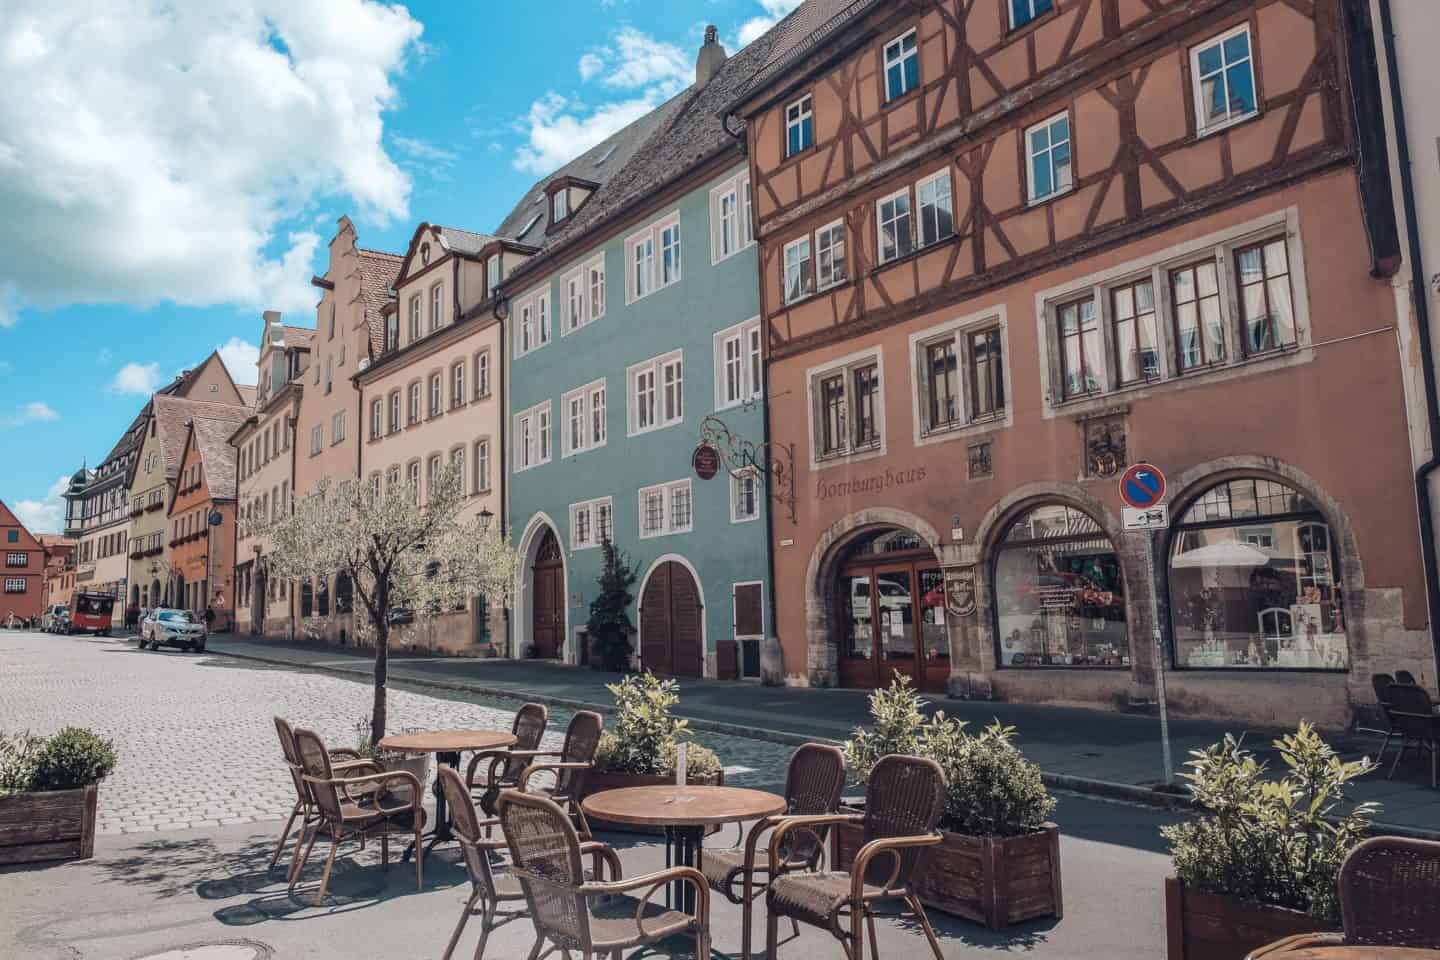 An inviting outdoor cafe setting in Rothenburg od der Tauber historic town square, with colorful buildings under a clear blue sky, awaits visitors looking for a quaint spot to relax.